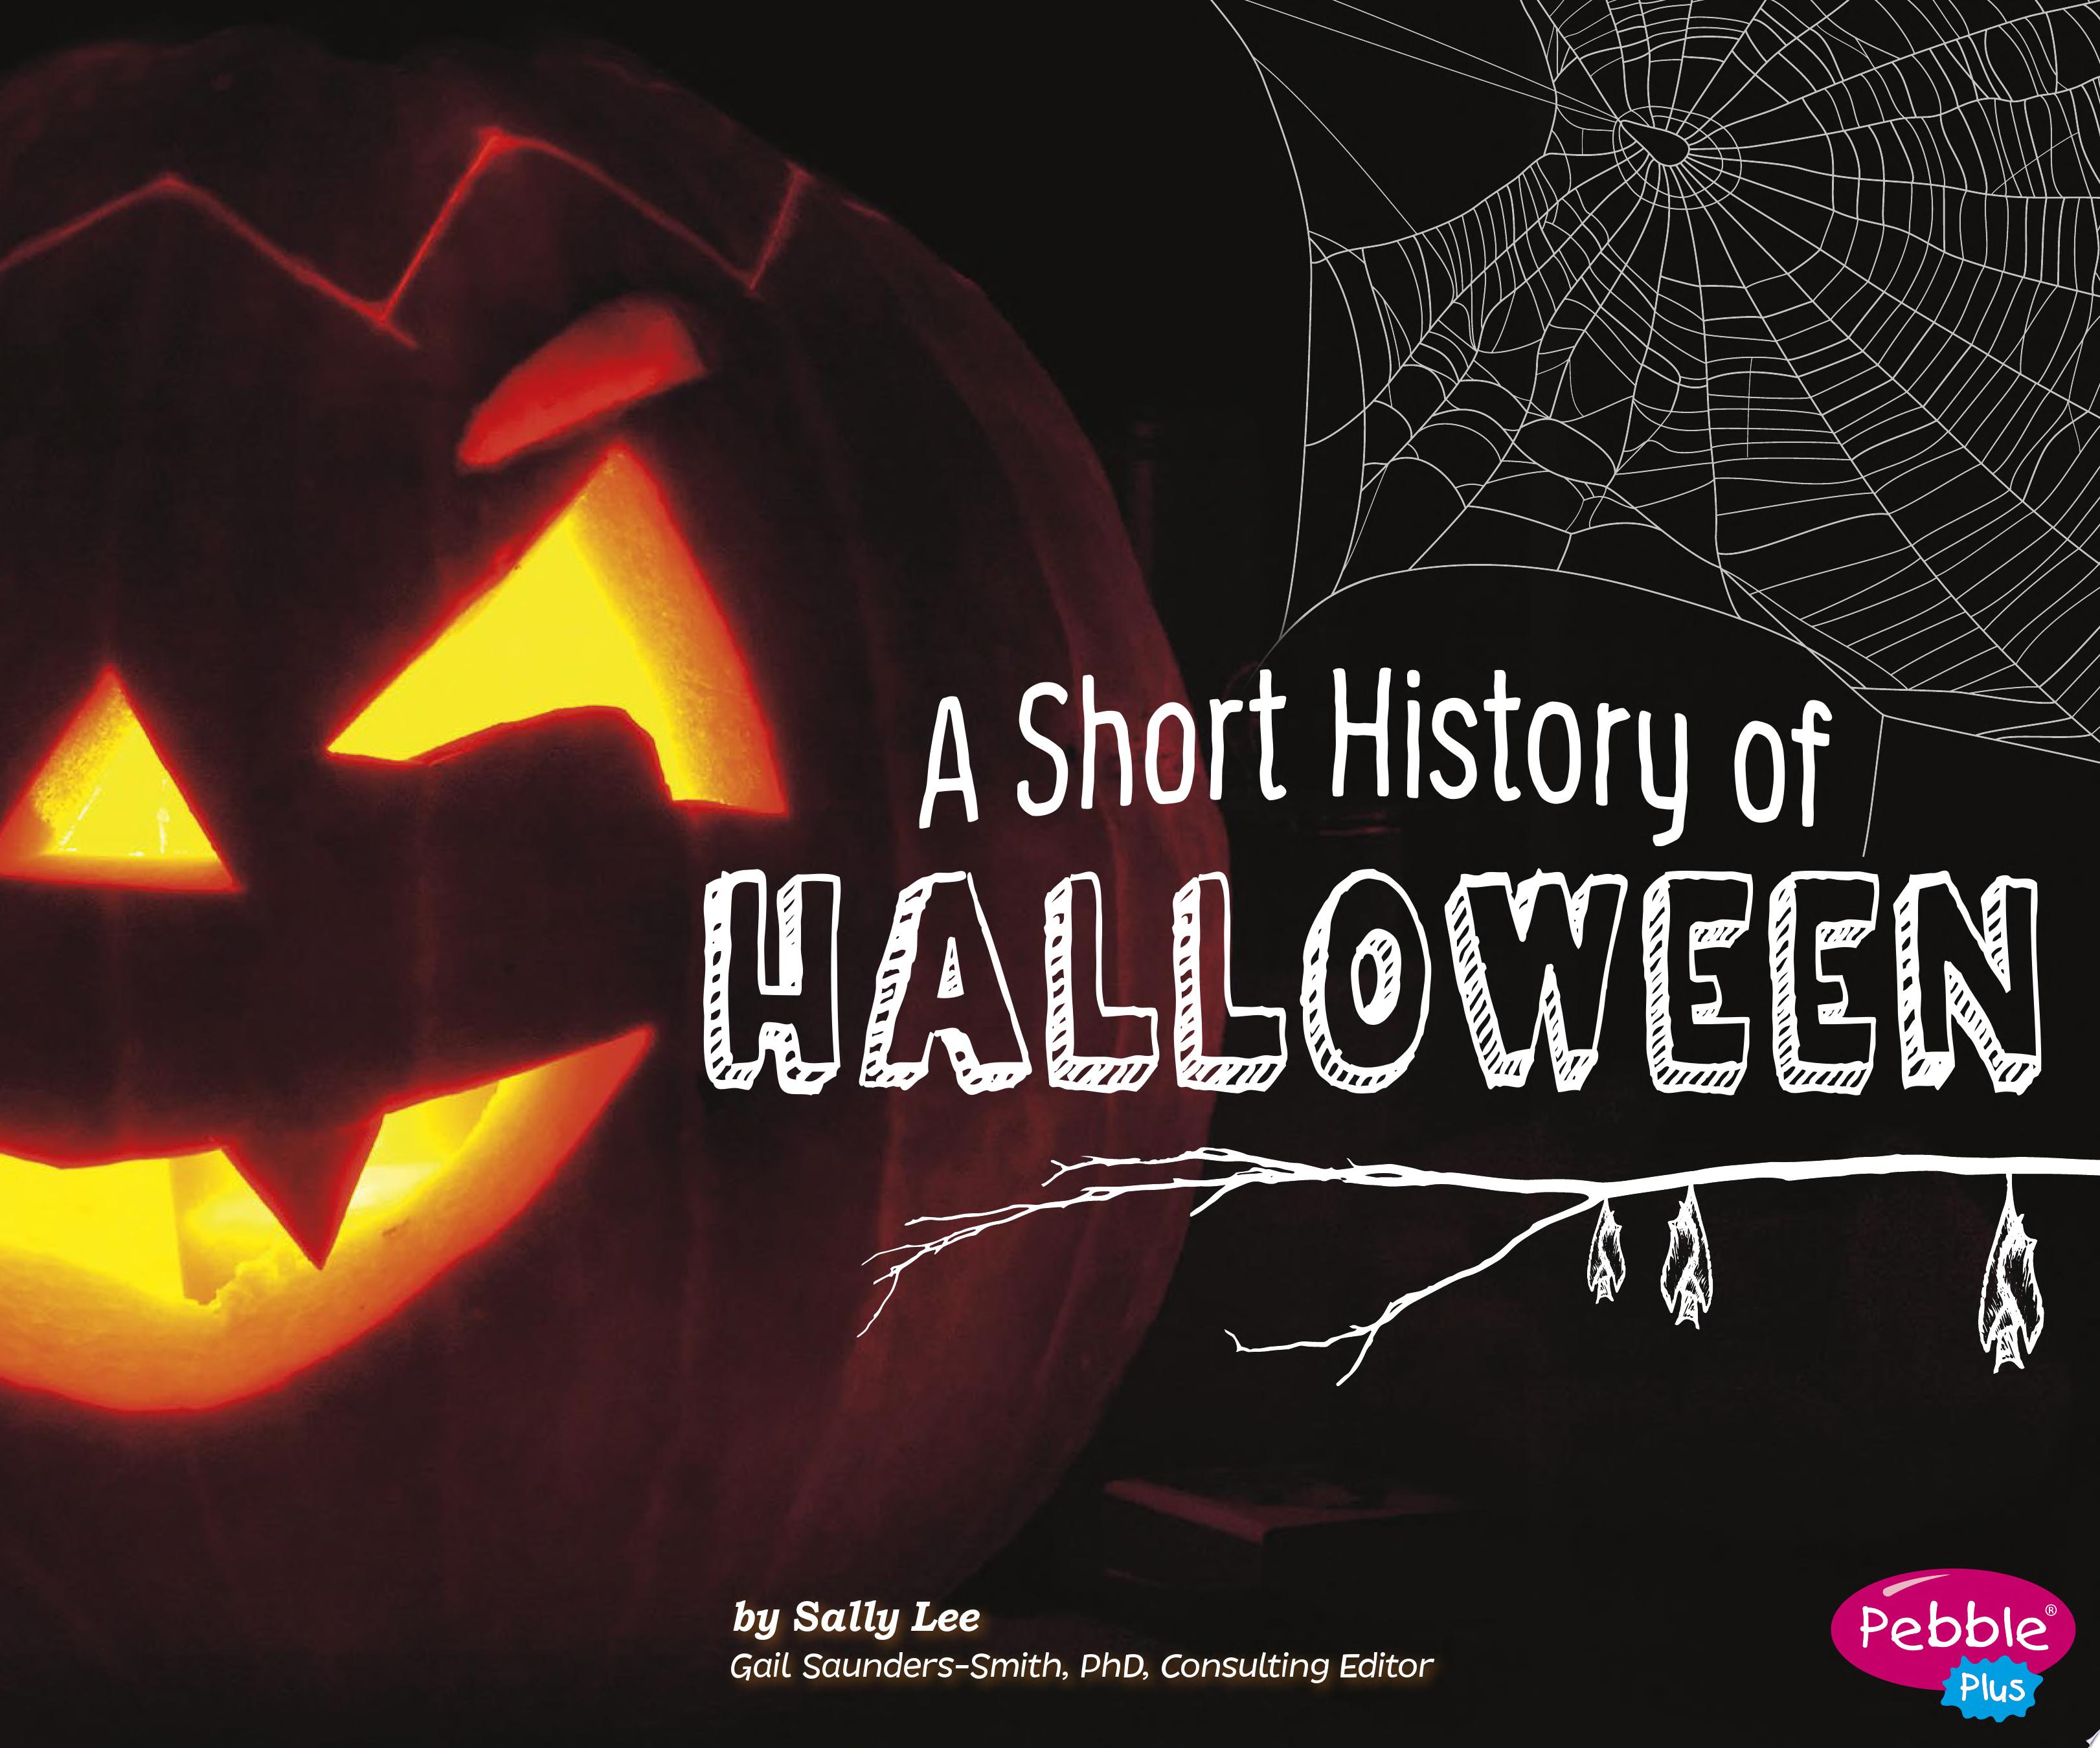 Image for "A Short History of Halloween"